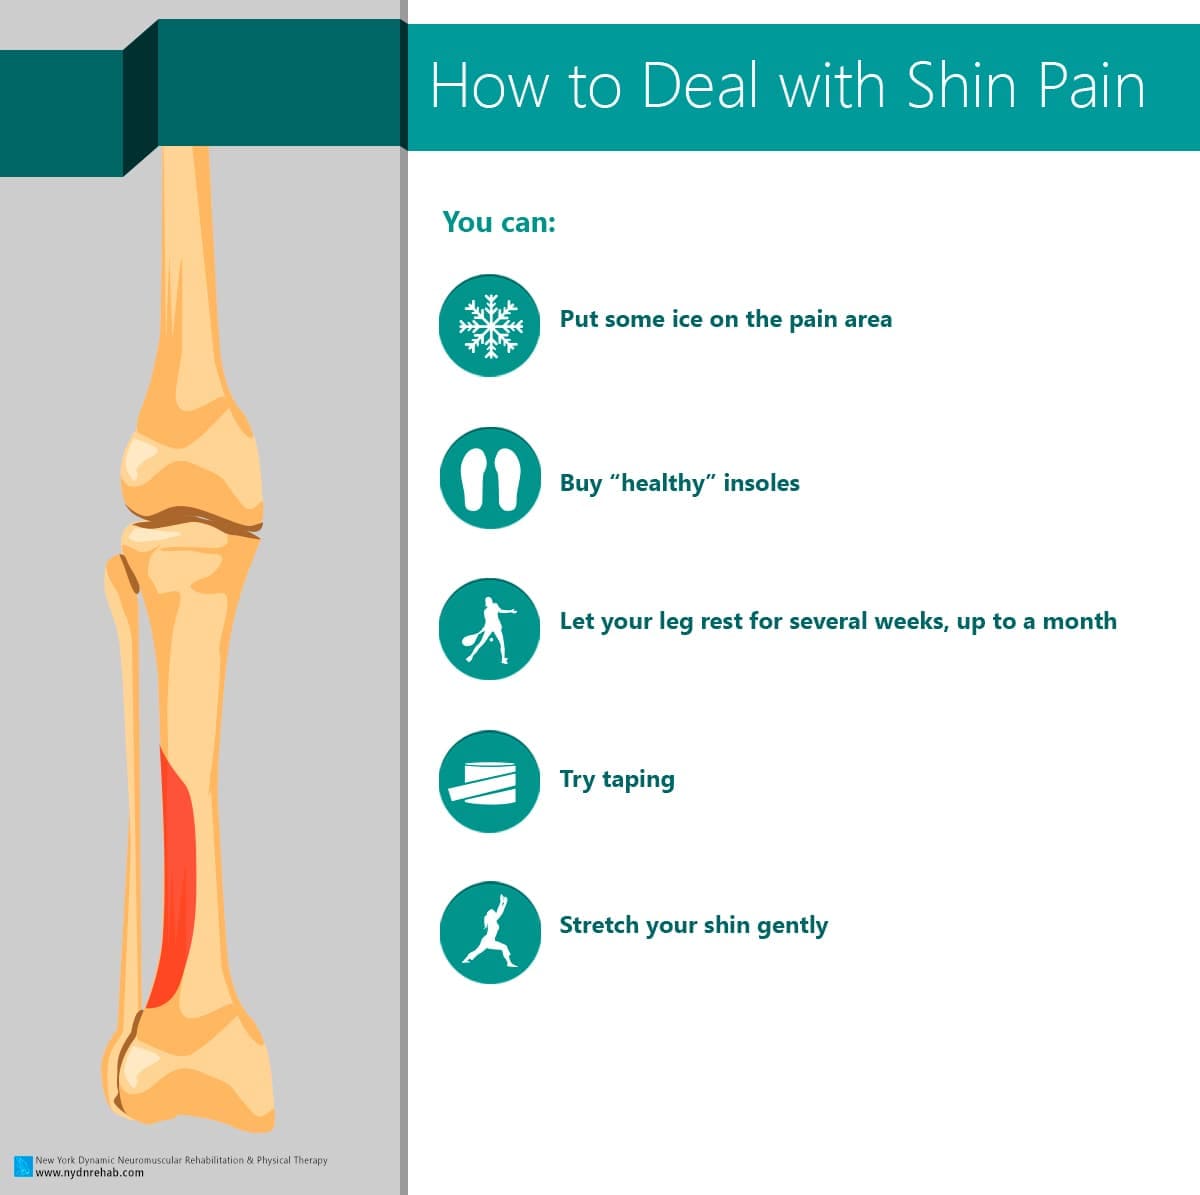 How to Deal with Shin Pain?